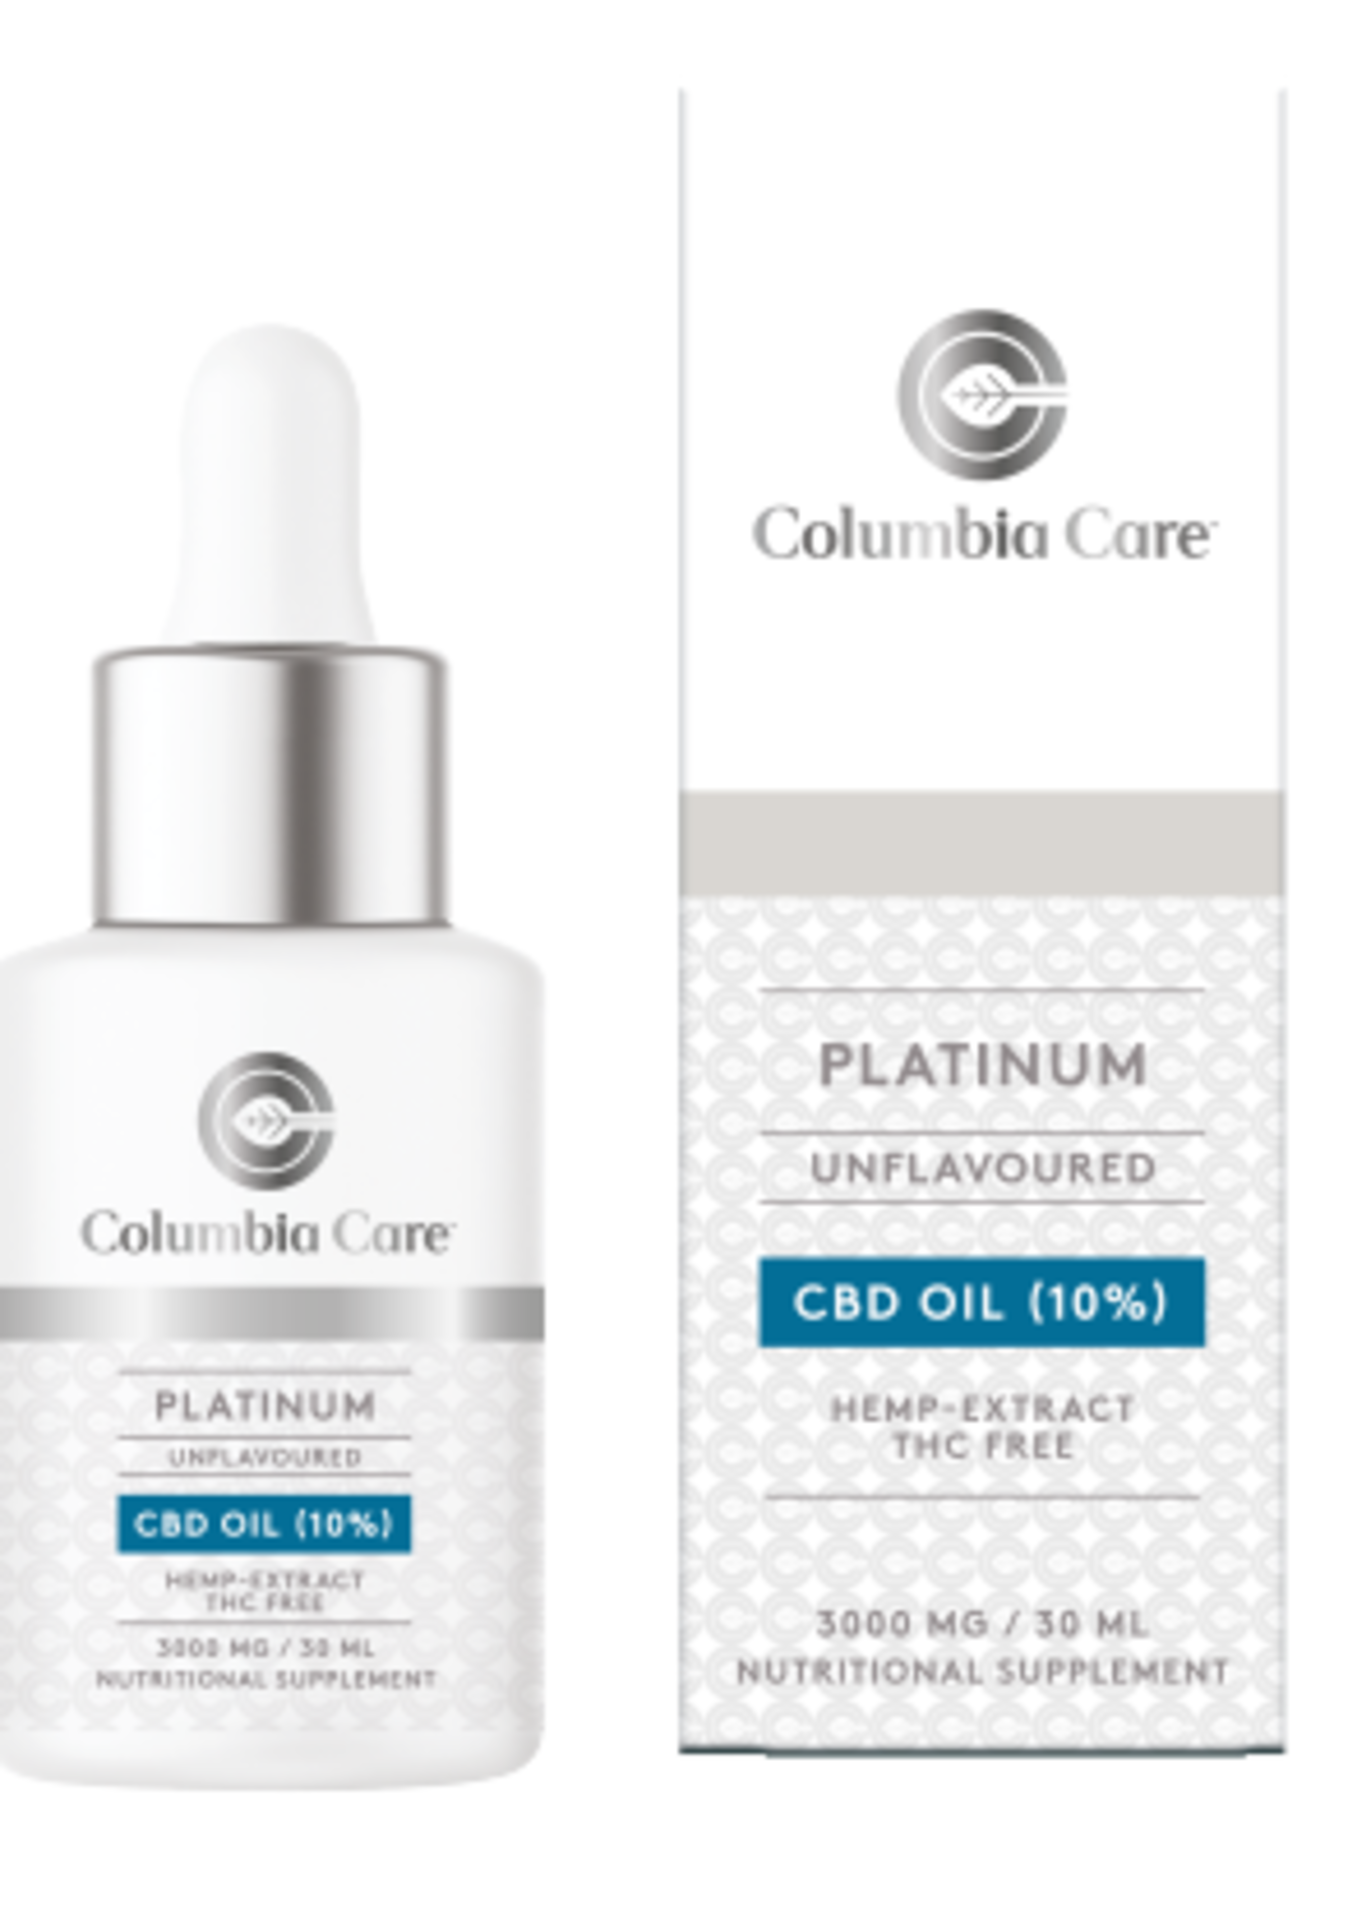 50 x Brand New Columbia Care Platinum oils in various flavours and mg 10ml. Columbia Care, a leading - Image 2 of 2